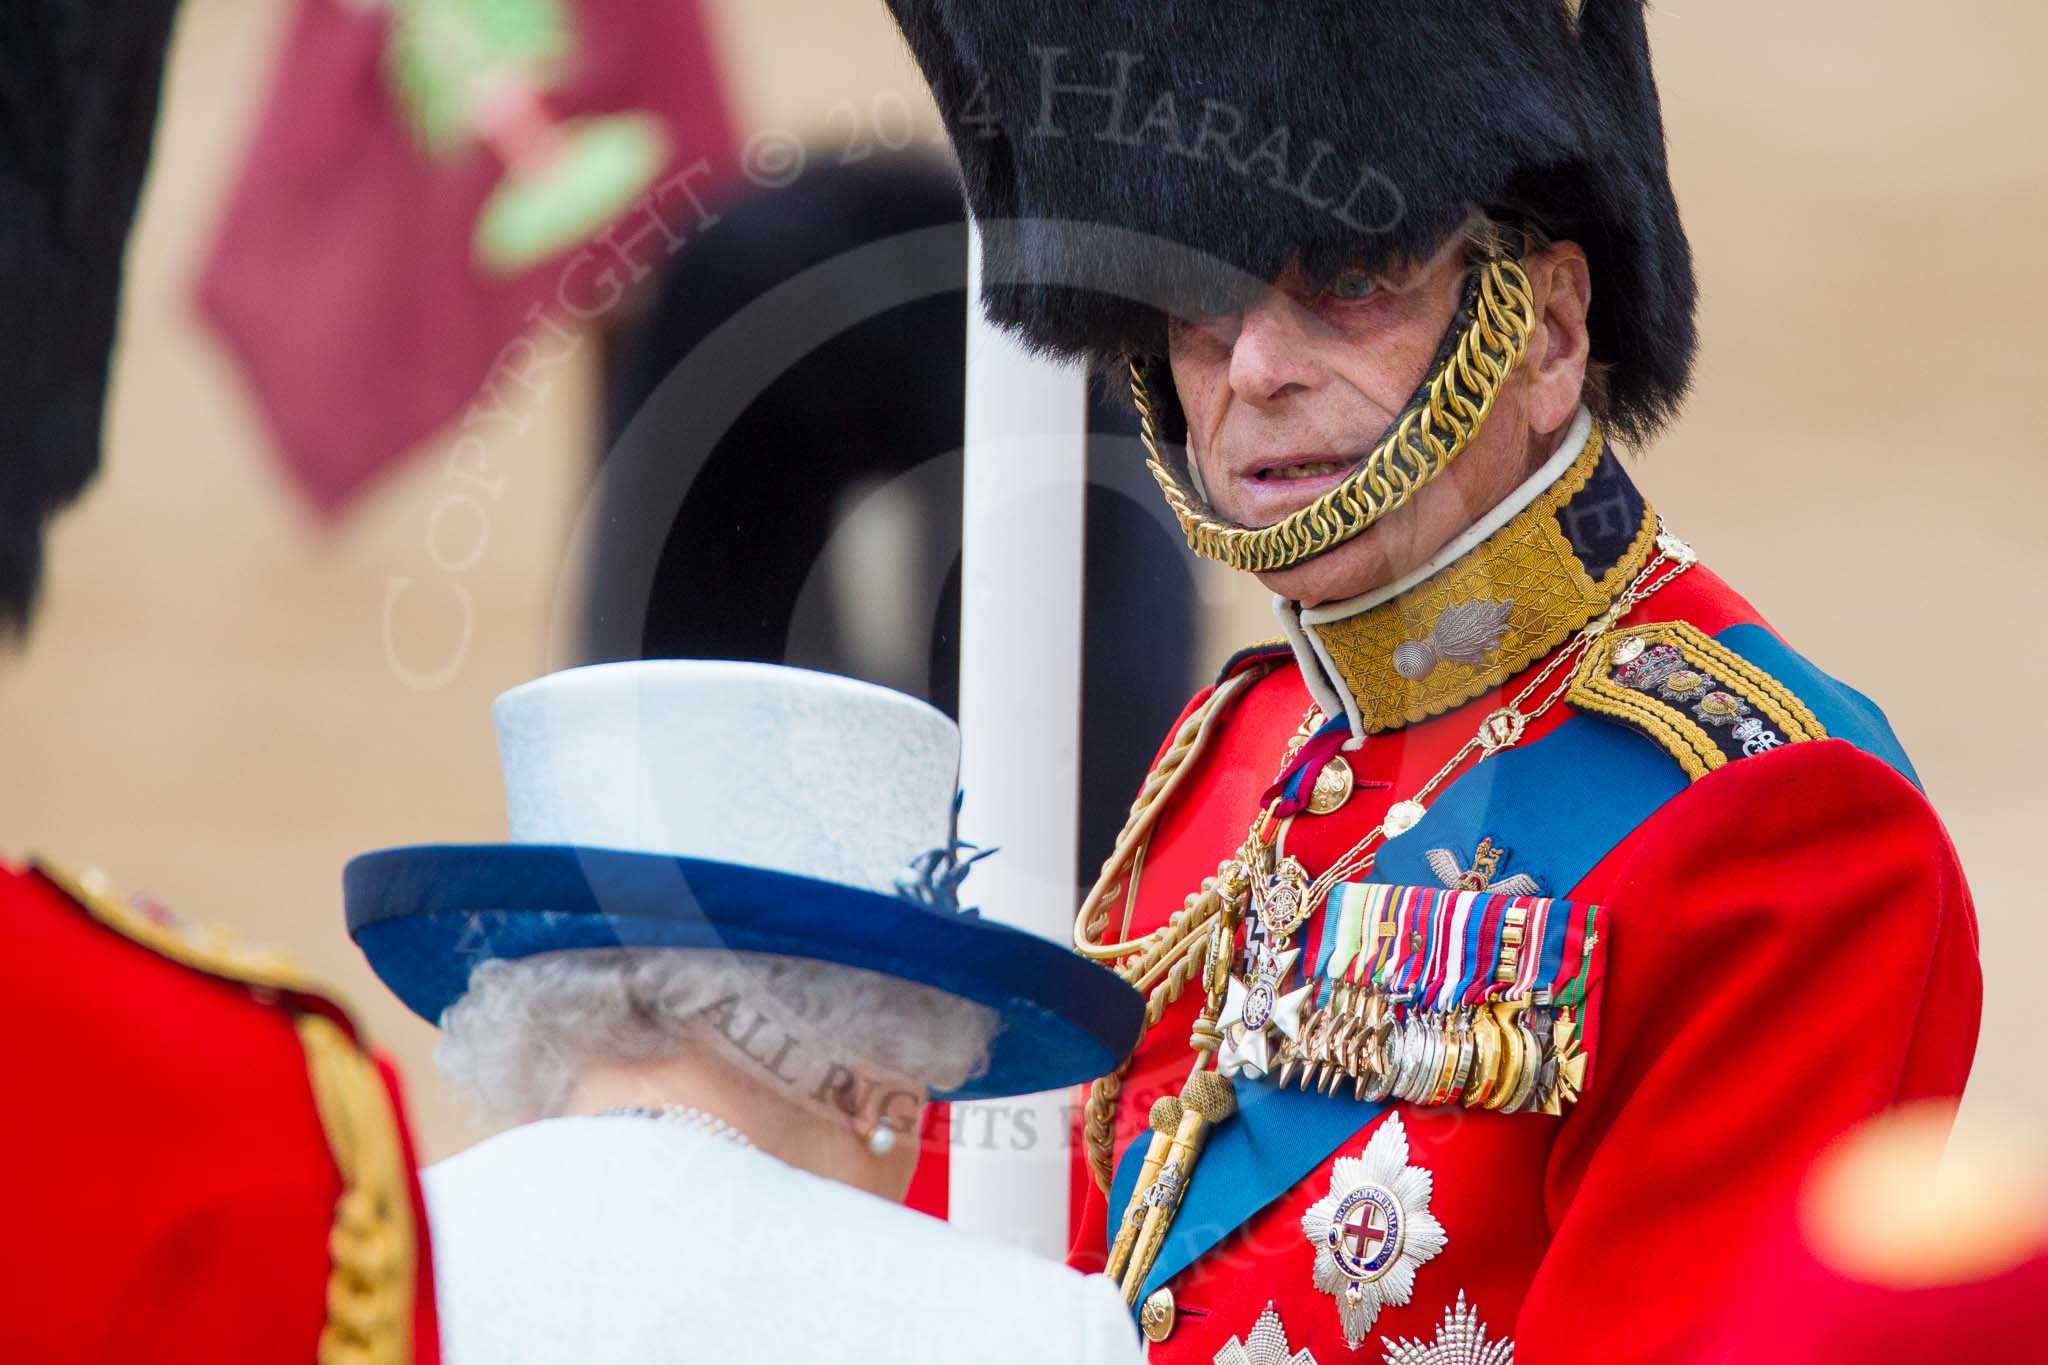 Trooping the Colour 2014.
Horse Guards Parade, Westminster,
London SW1A,

United Kingdom,
on 14 June 2014 at 11:08, image #450